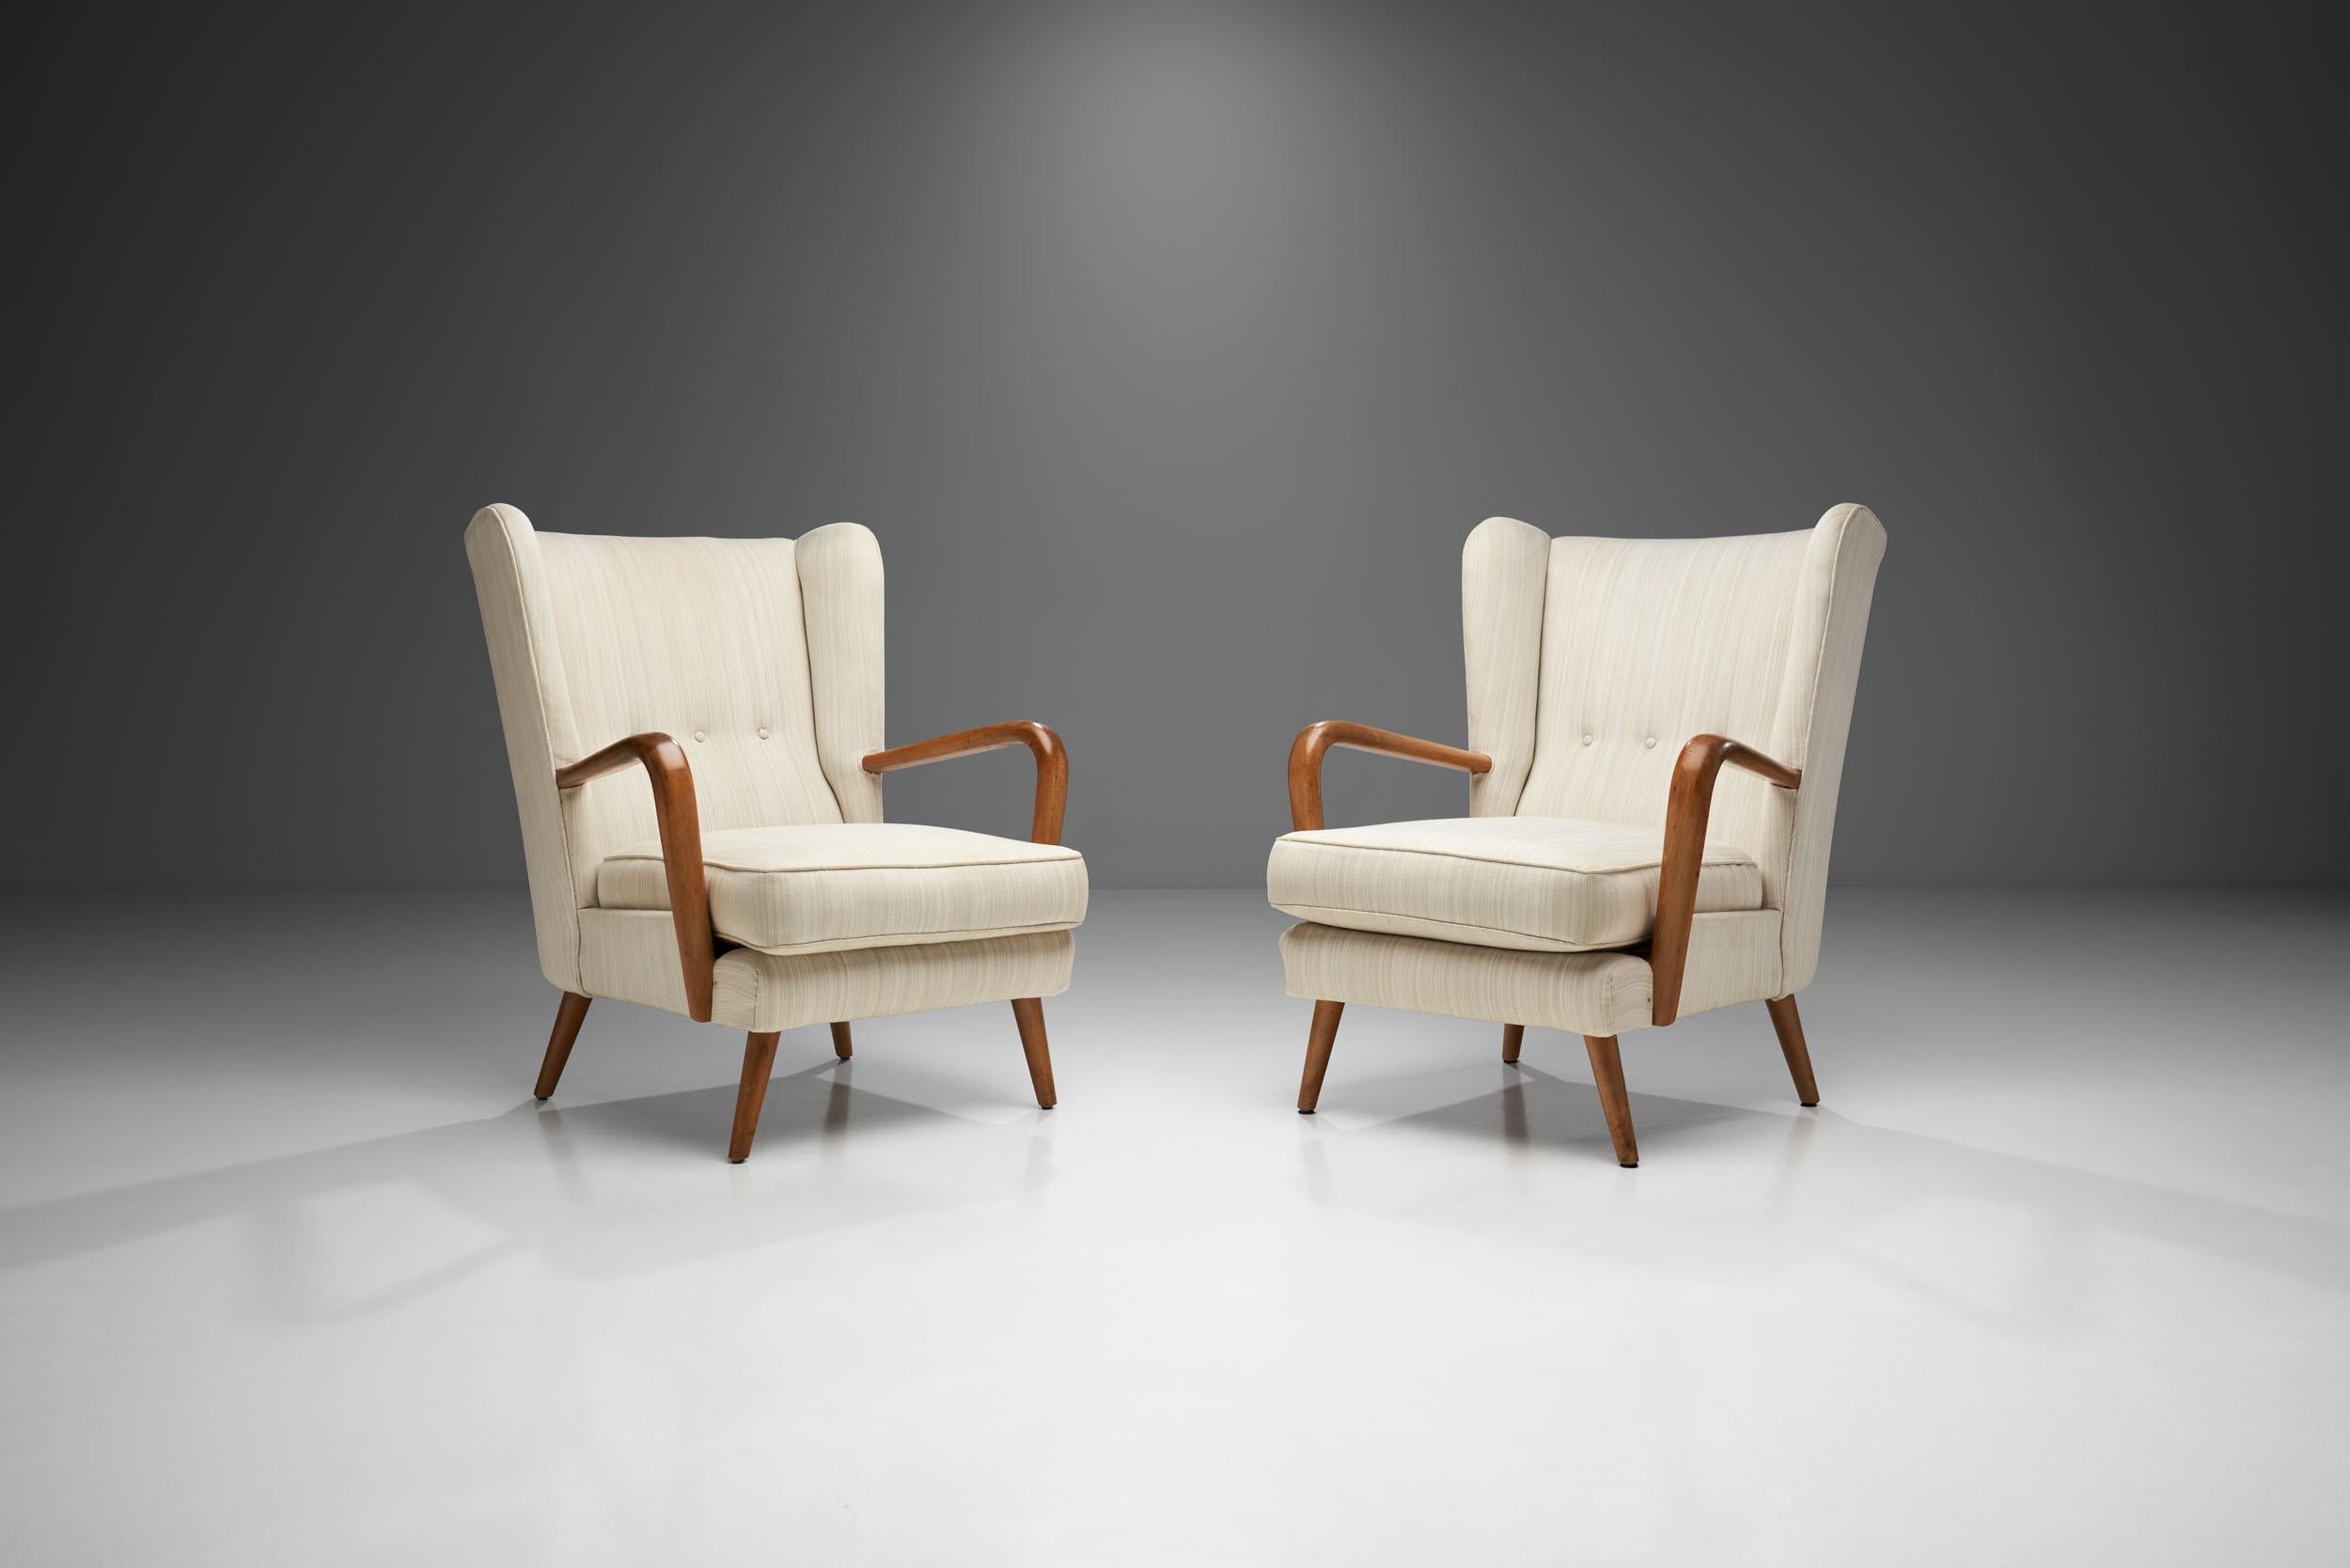 Mid-Century Modern Howard Keith “Bambino” Chairs for HK Furniture, England, 1950s